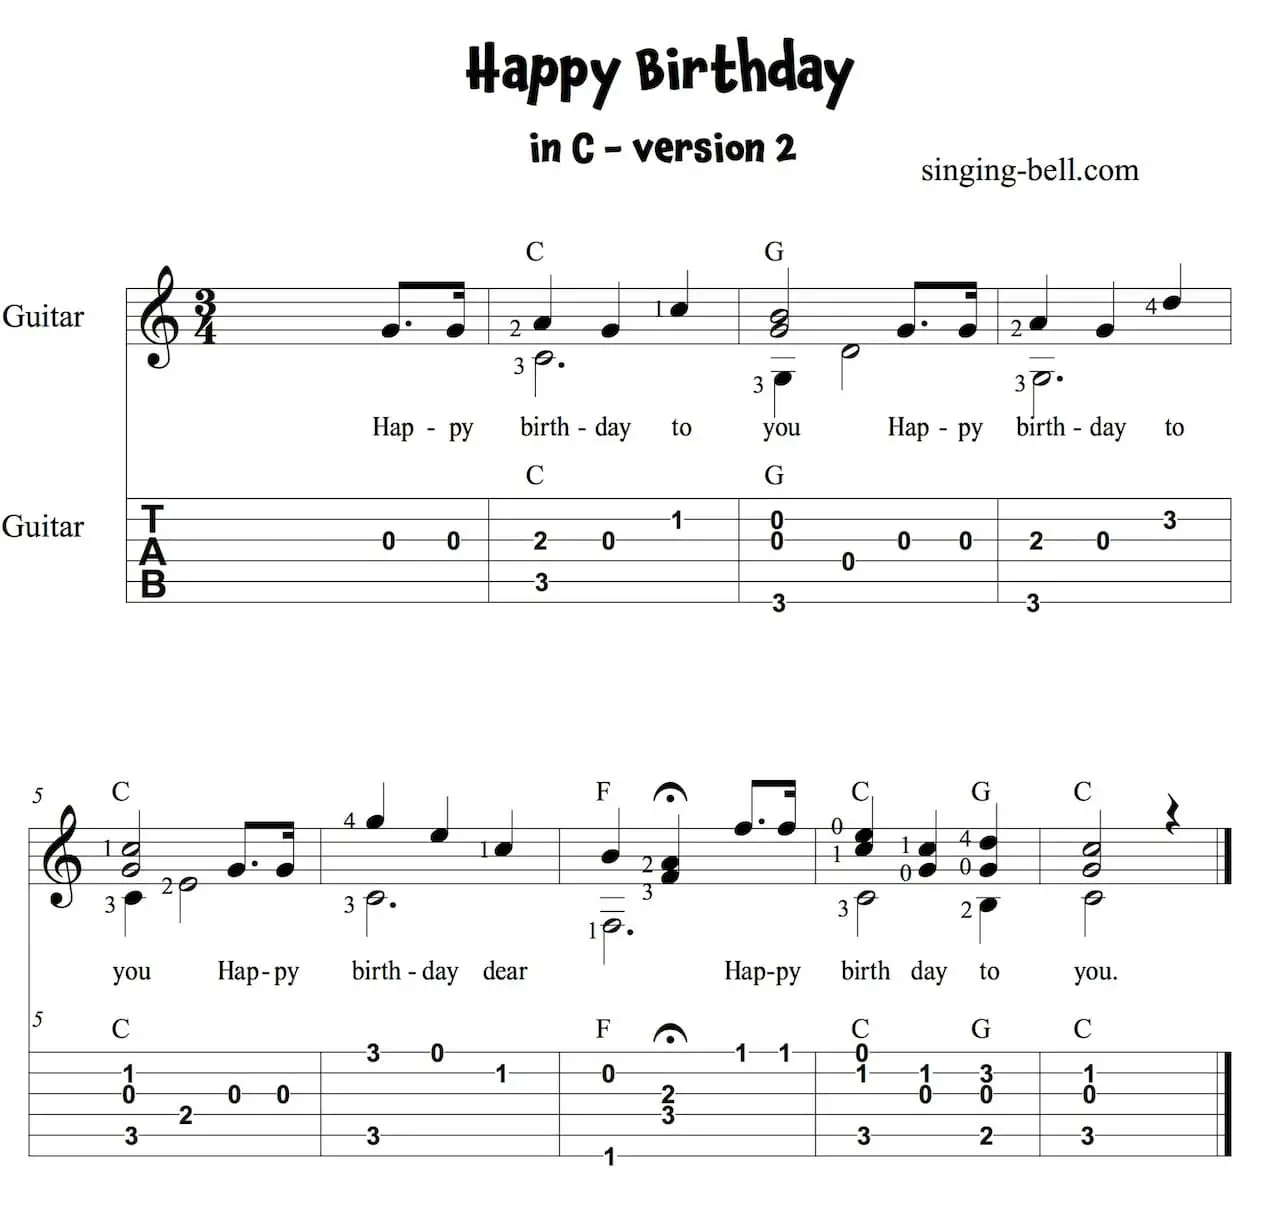 Happy Birthday Song - easy guitar sheet music with notes and Tablature in C - version 2.